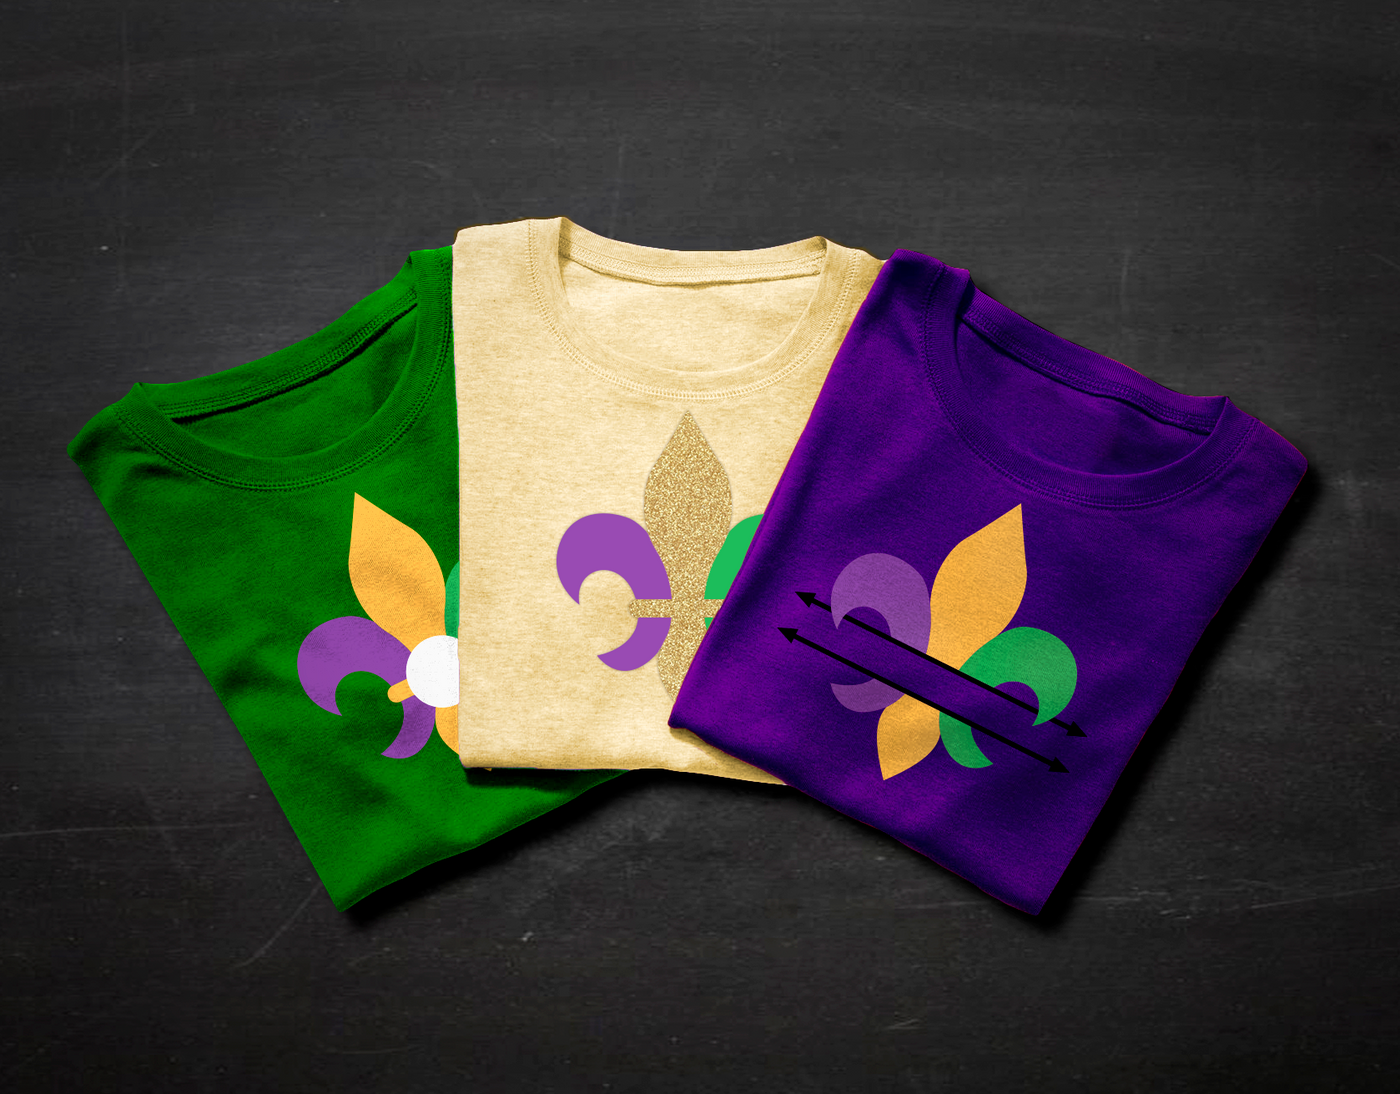 Three folded tees, each with a fleur de lis design. One has a split in the middle, and one has a center circle for adding a monogram.